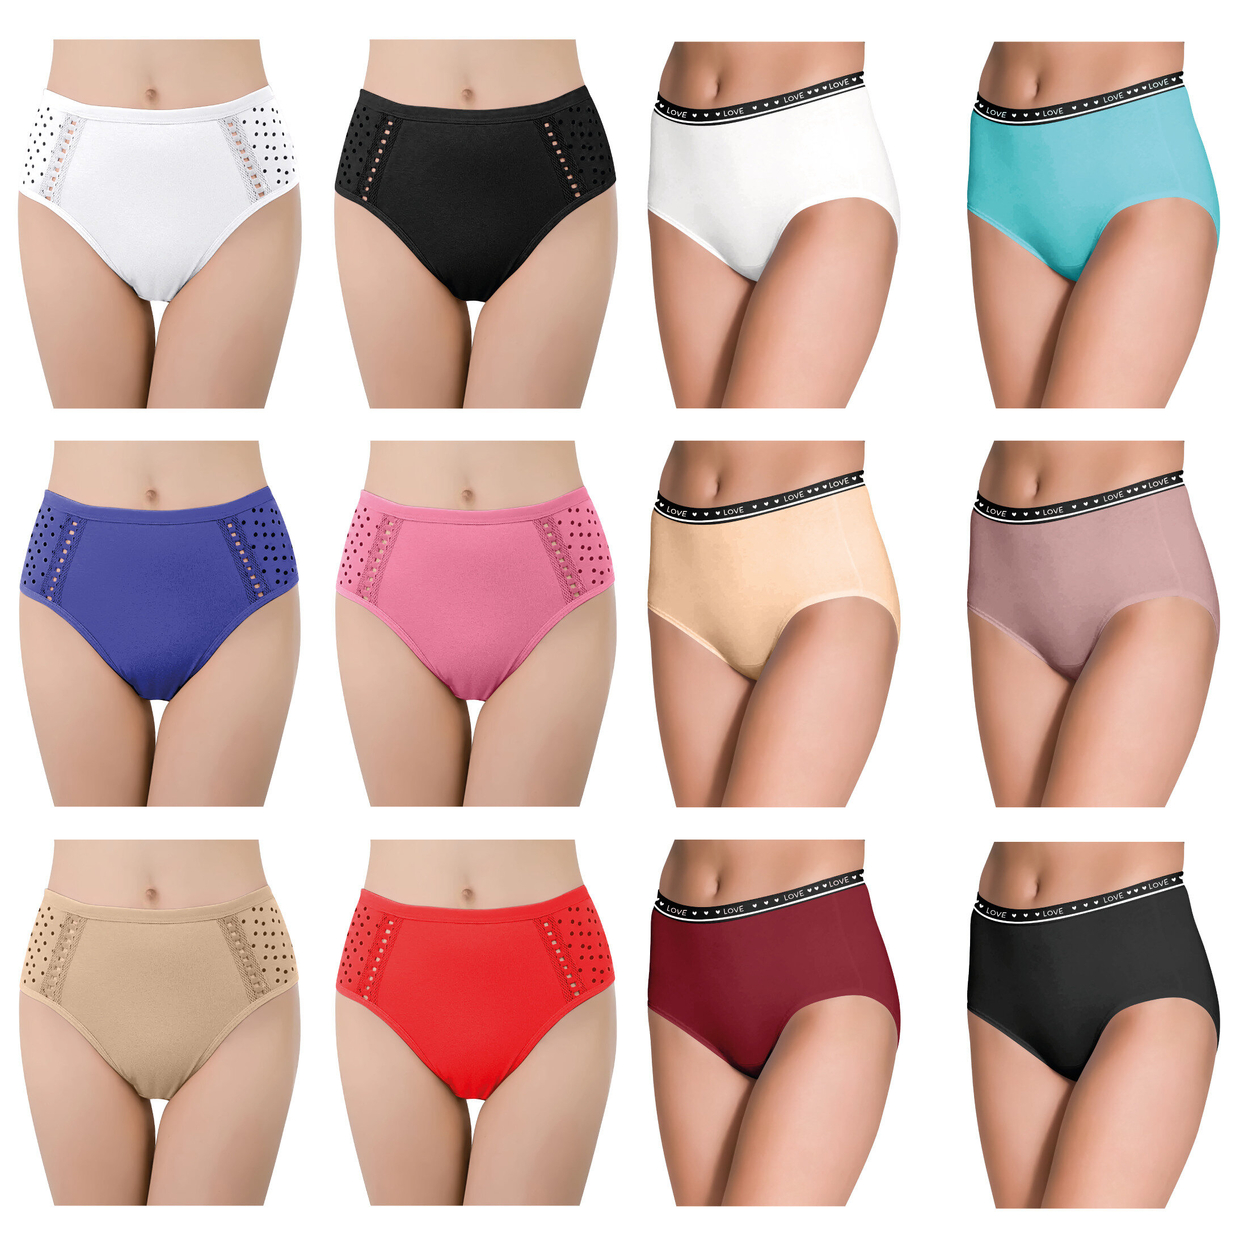 Multi-Pack: Women's Ultra Soft Moisture Wicking Panties Cotton Perfect Fit Underwear (Plus Sizes Available) - 6-Pack, Xx-large